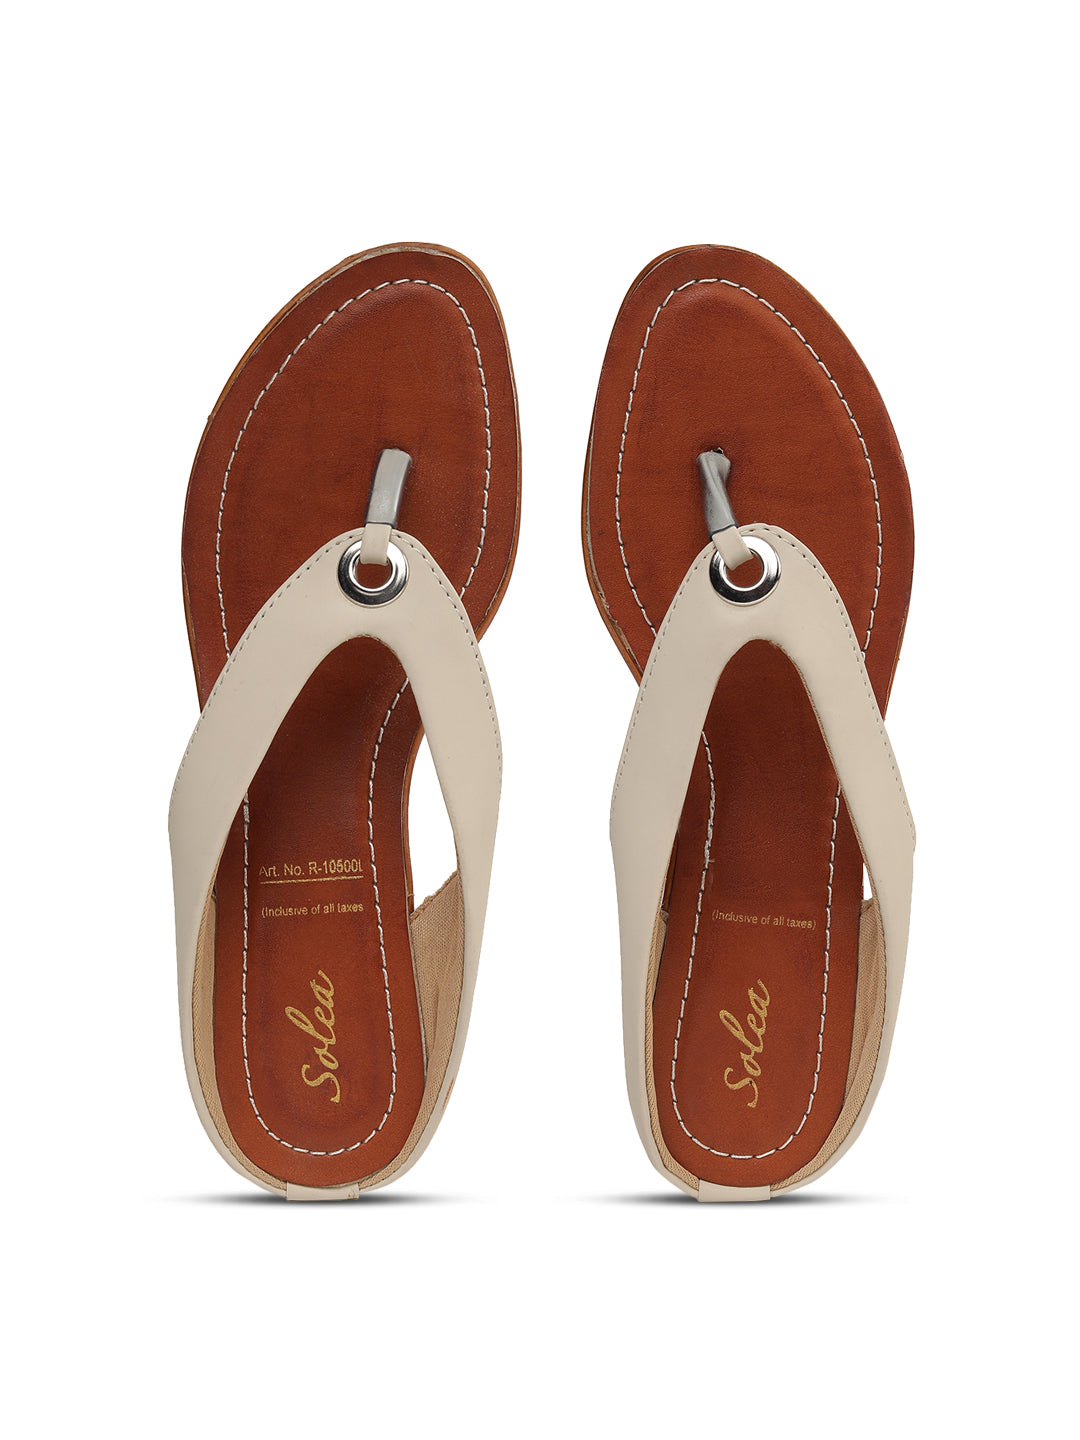 Paragon R10500L Women Sandals | Casual &amp; Formal Sandals | Stylish, Comfortable &amp; Durable | For Daily &amp; Occasion Wear